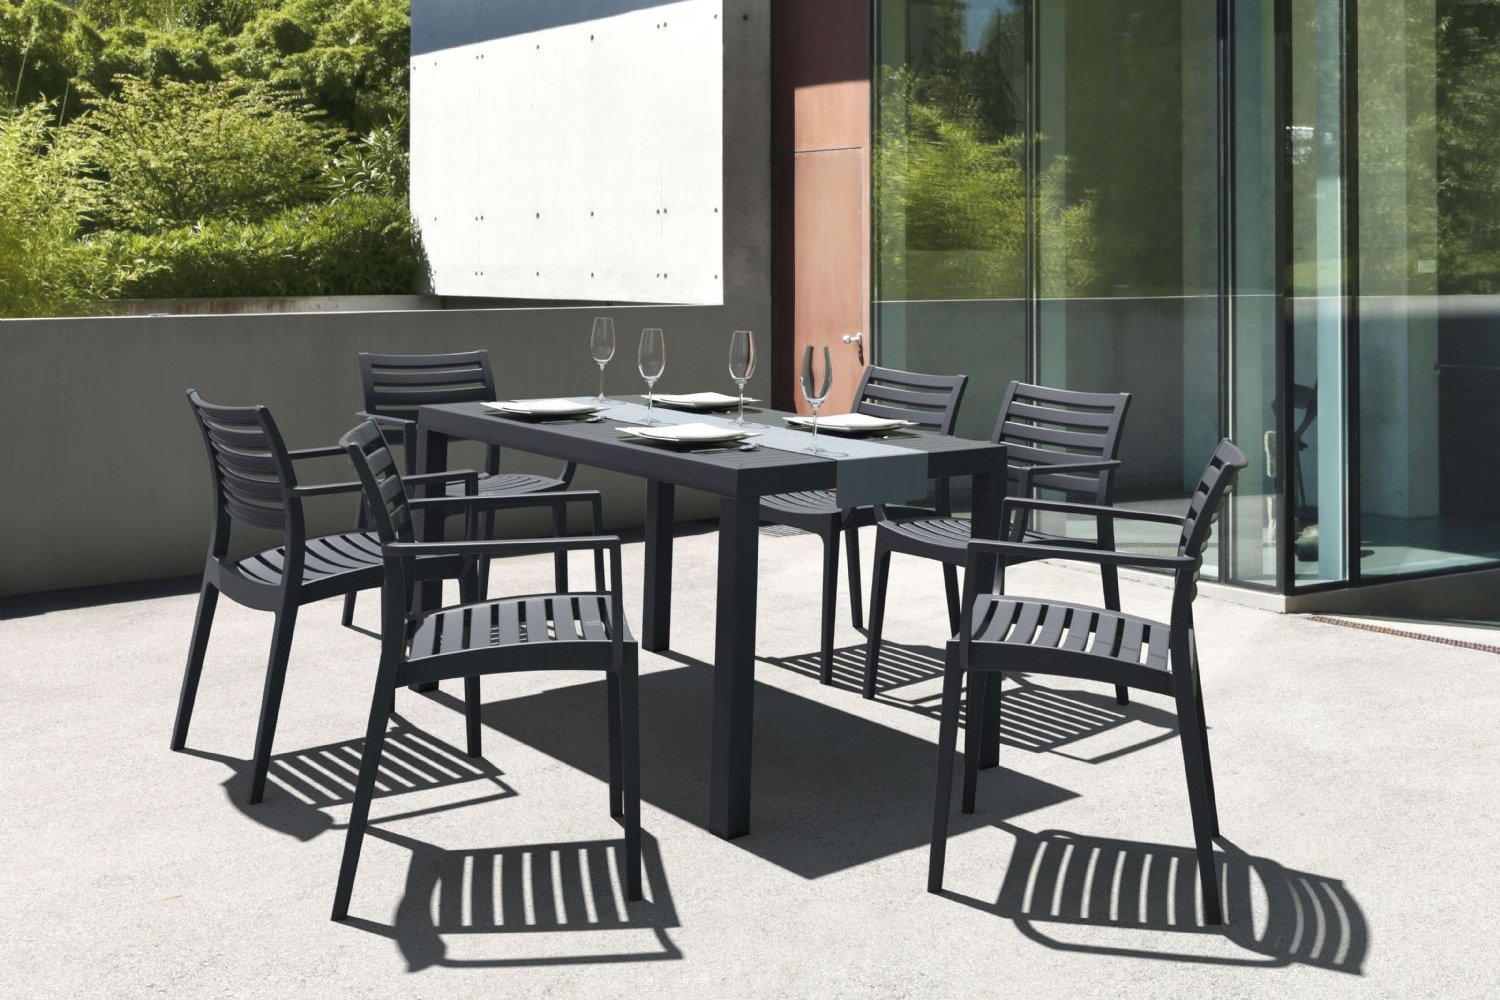 Artemis Resin Rectangle Outdoor Dining Set 7 Piece with Arm Chairs Dark Gray ISP1862S-DGR - 5